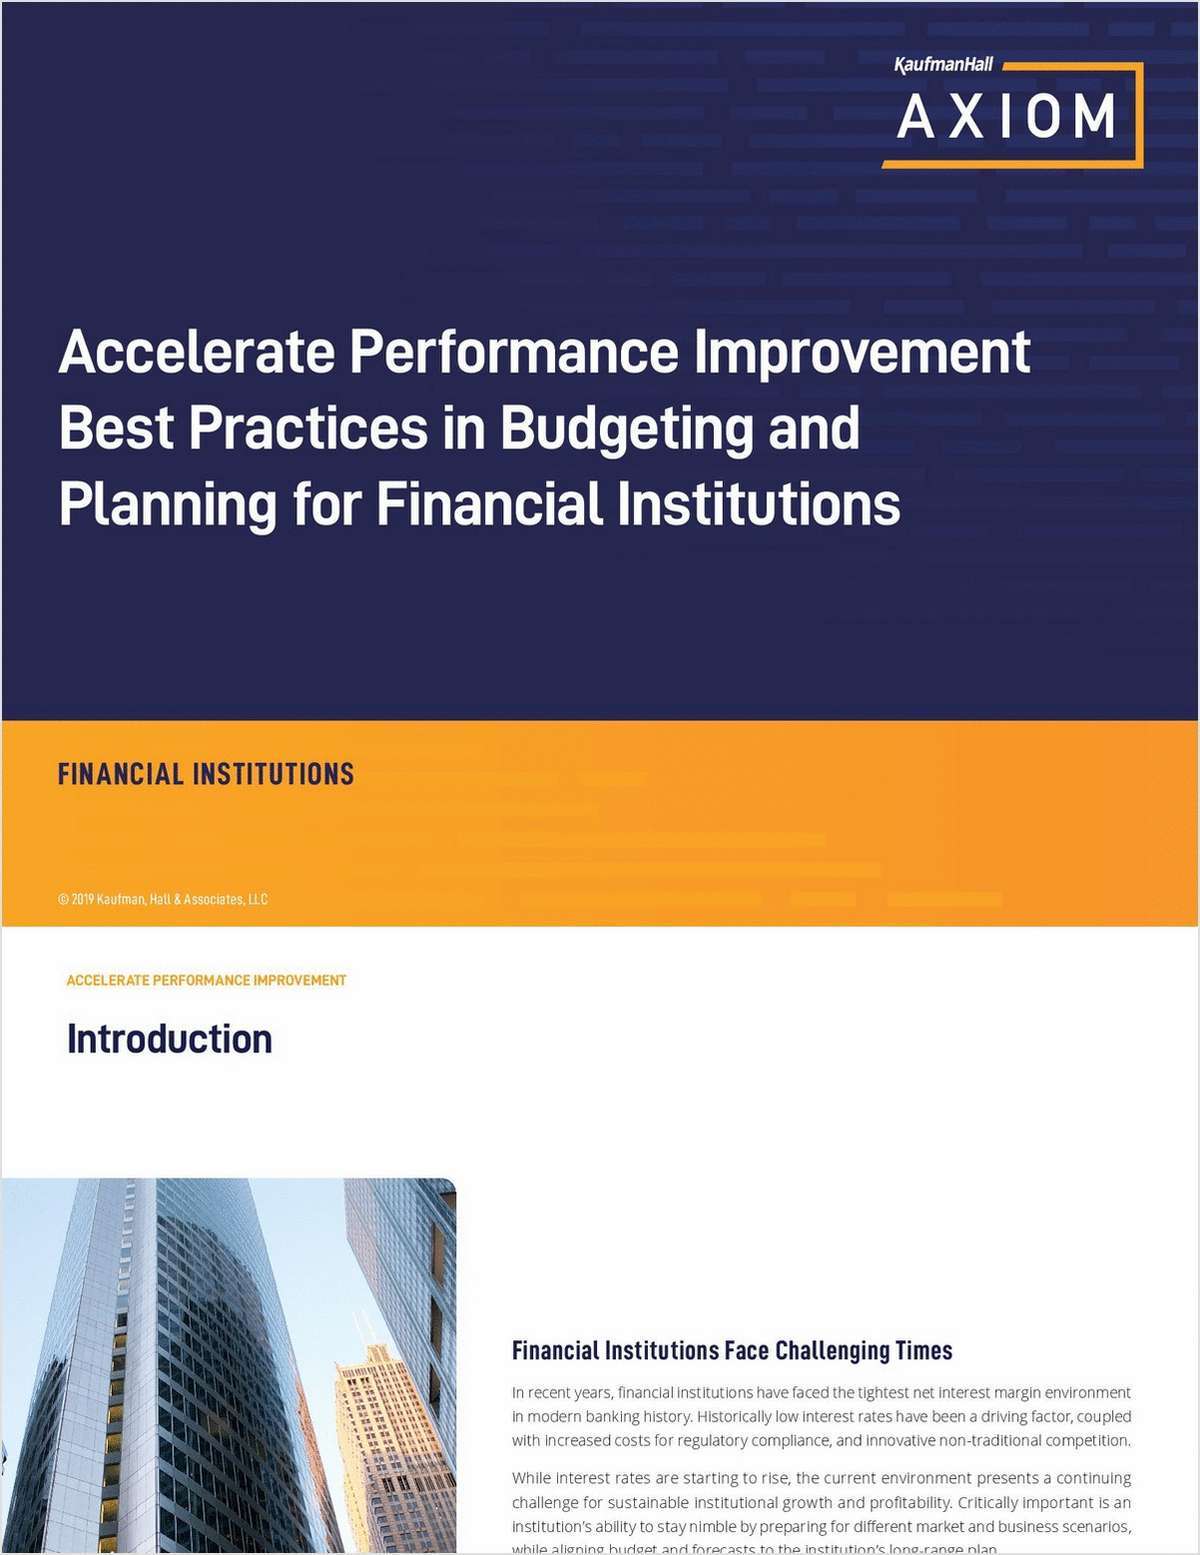 Accelerate Performance Improvement -- Best Practices in Budgeting and Planning